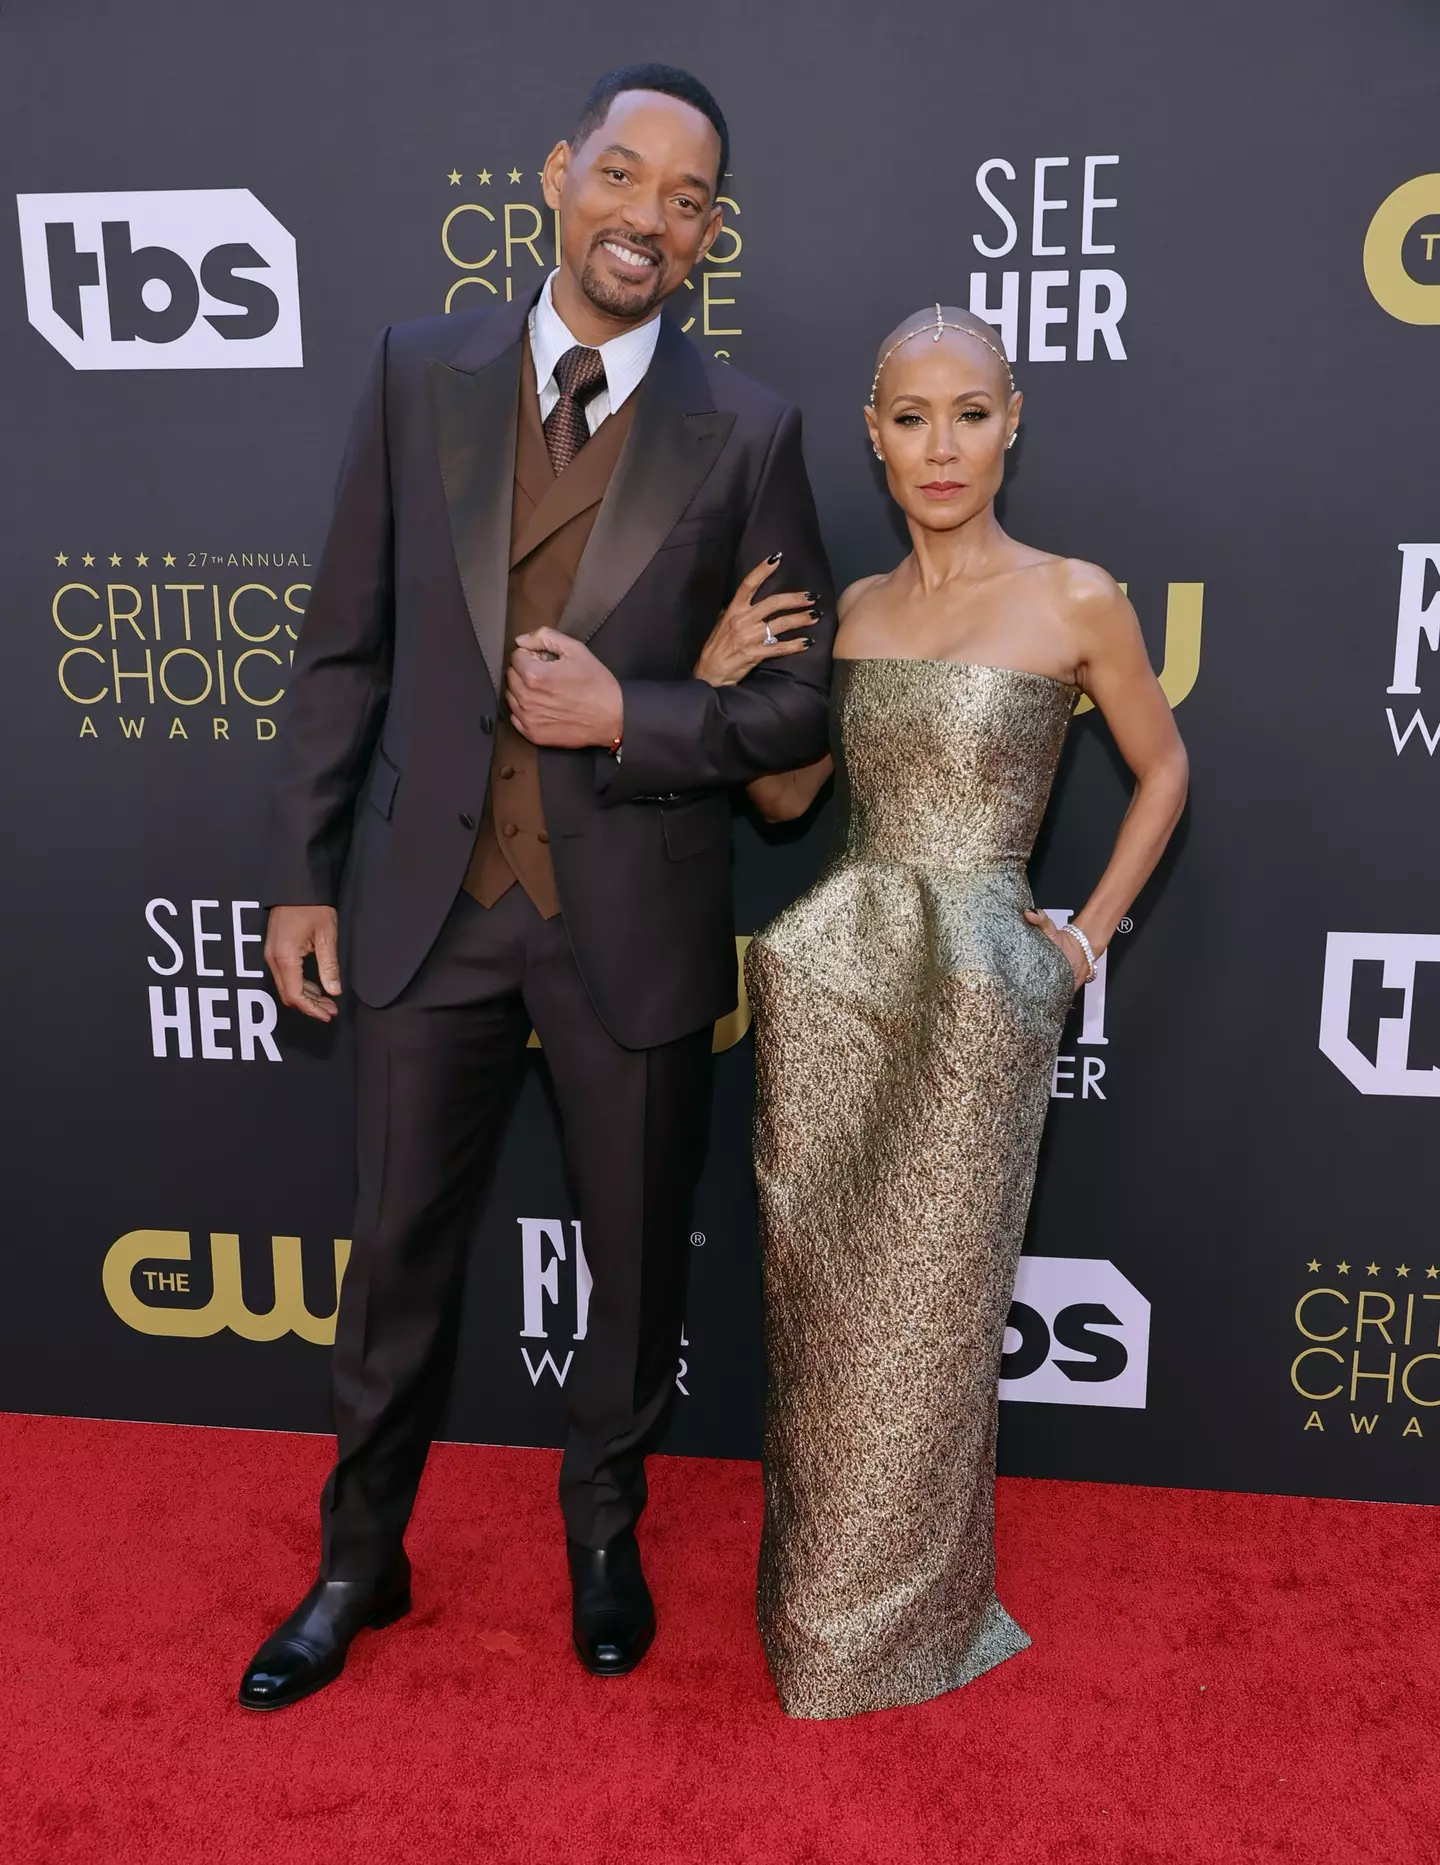 Jada Pinkett Smith says the former couple decided against prenup.